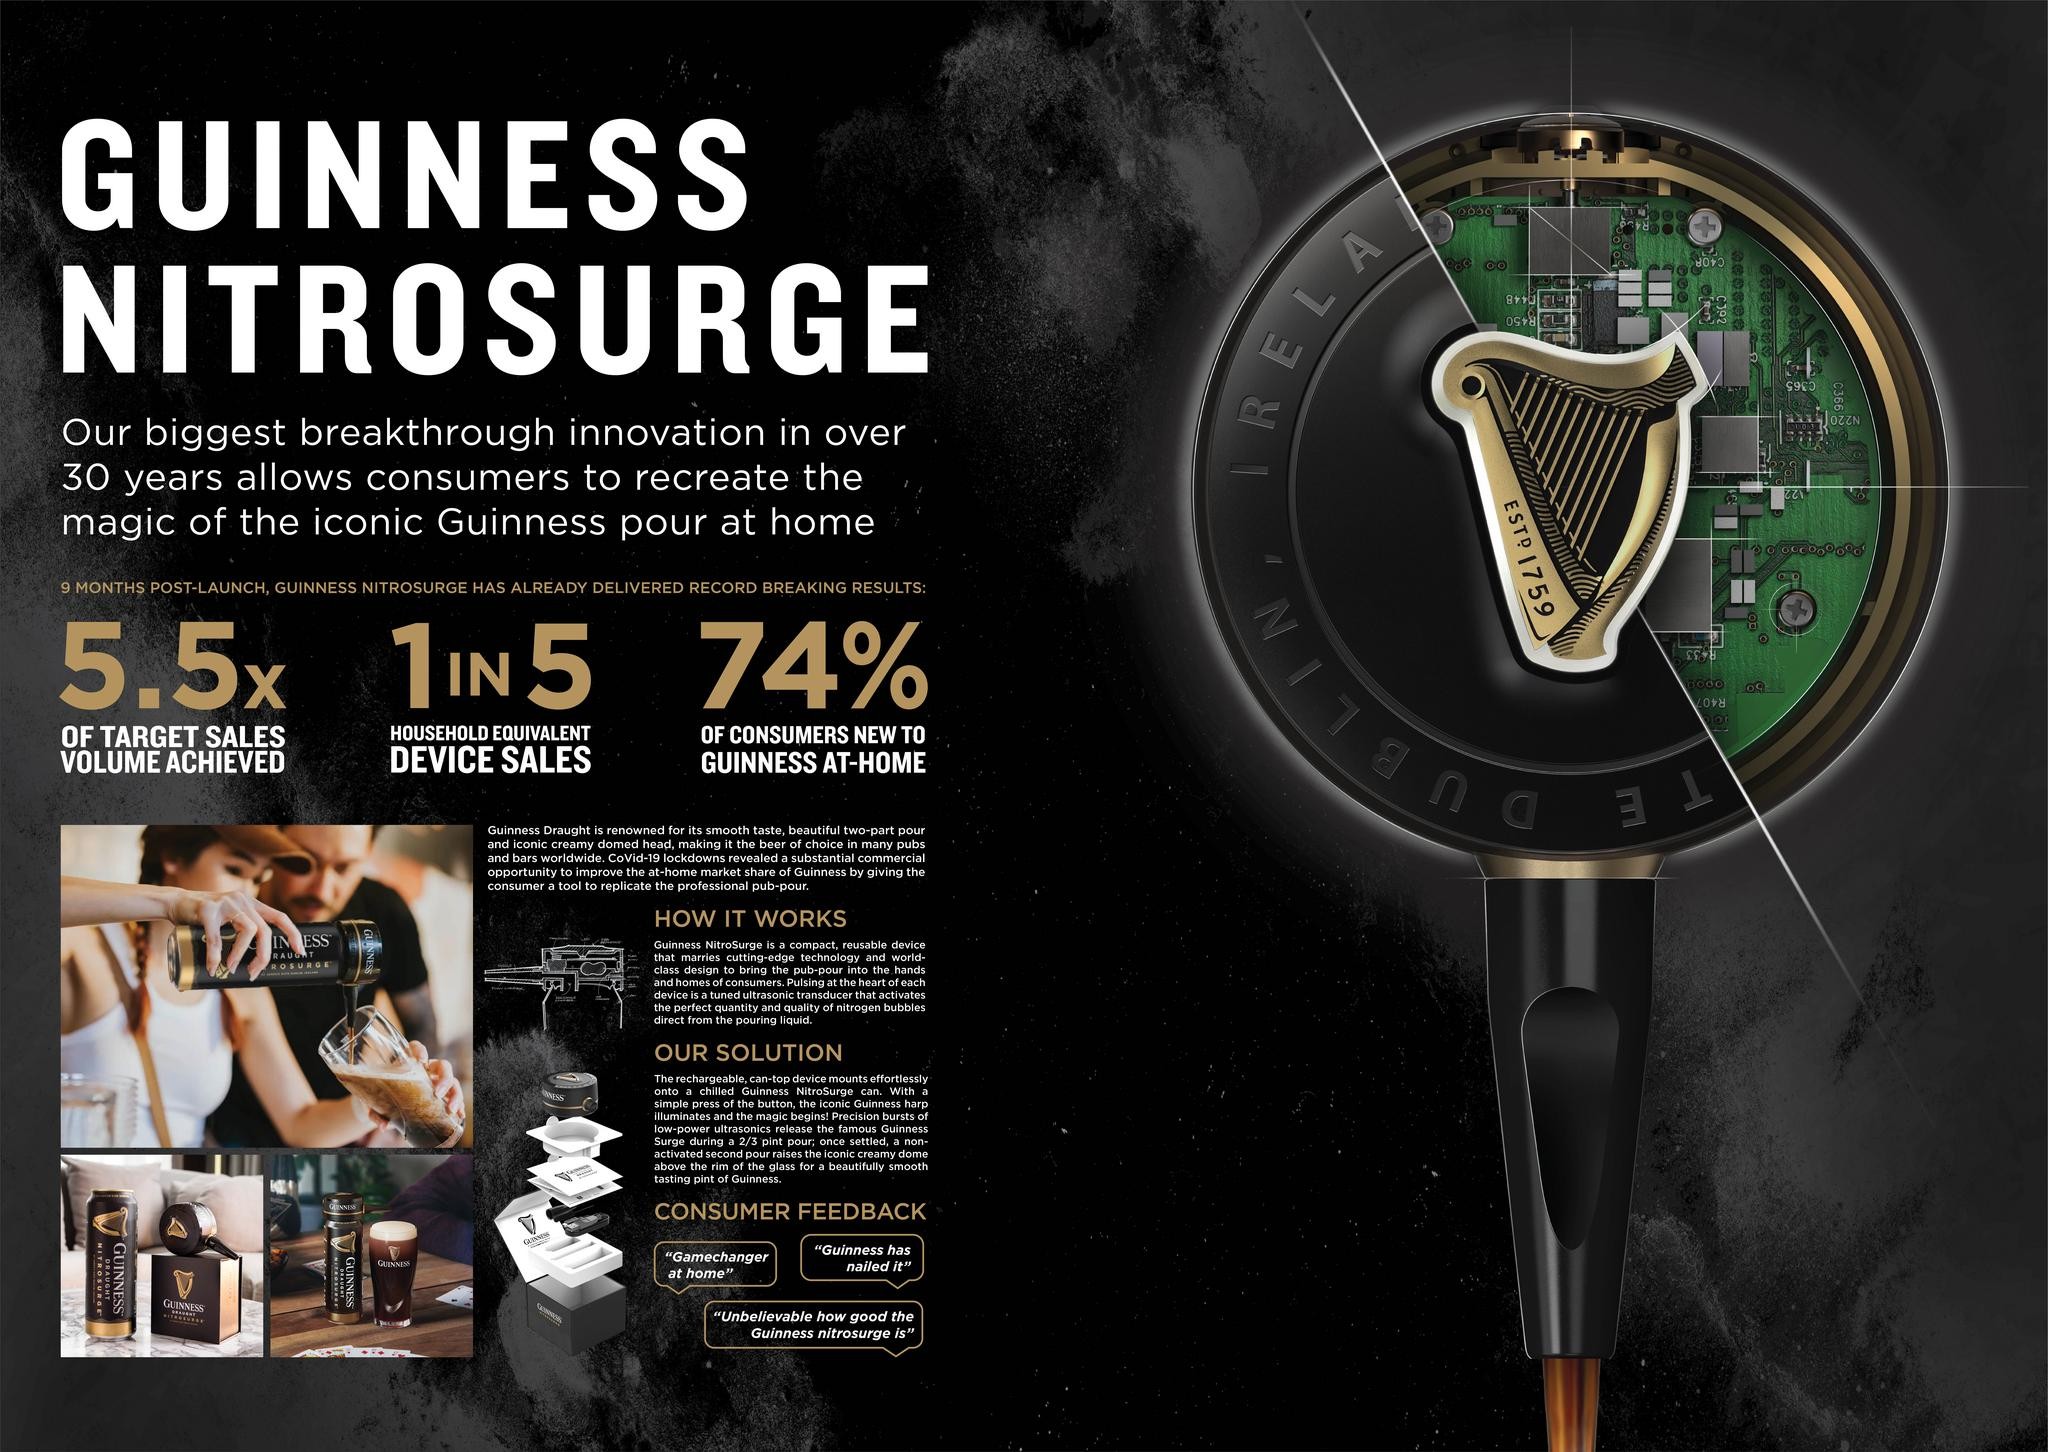 Guinness NitroSurge - Surging with Innovation